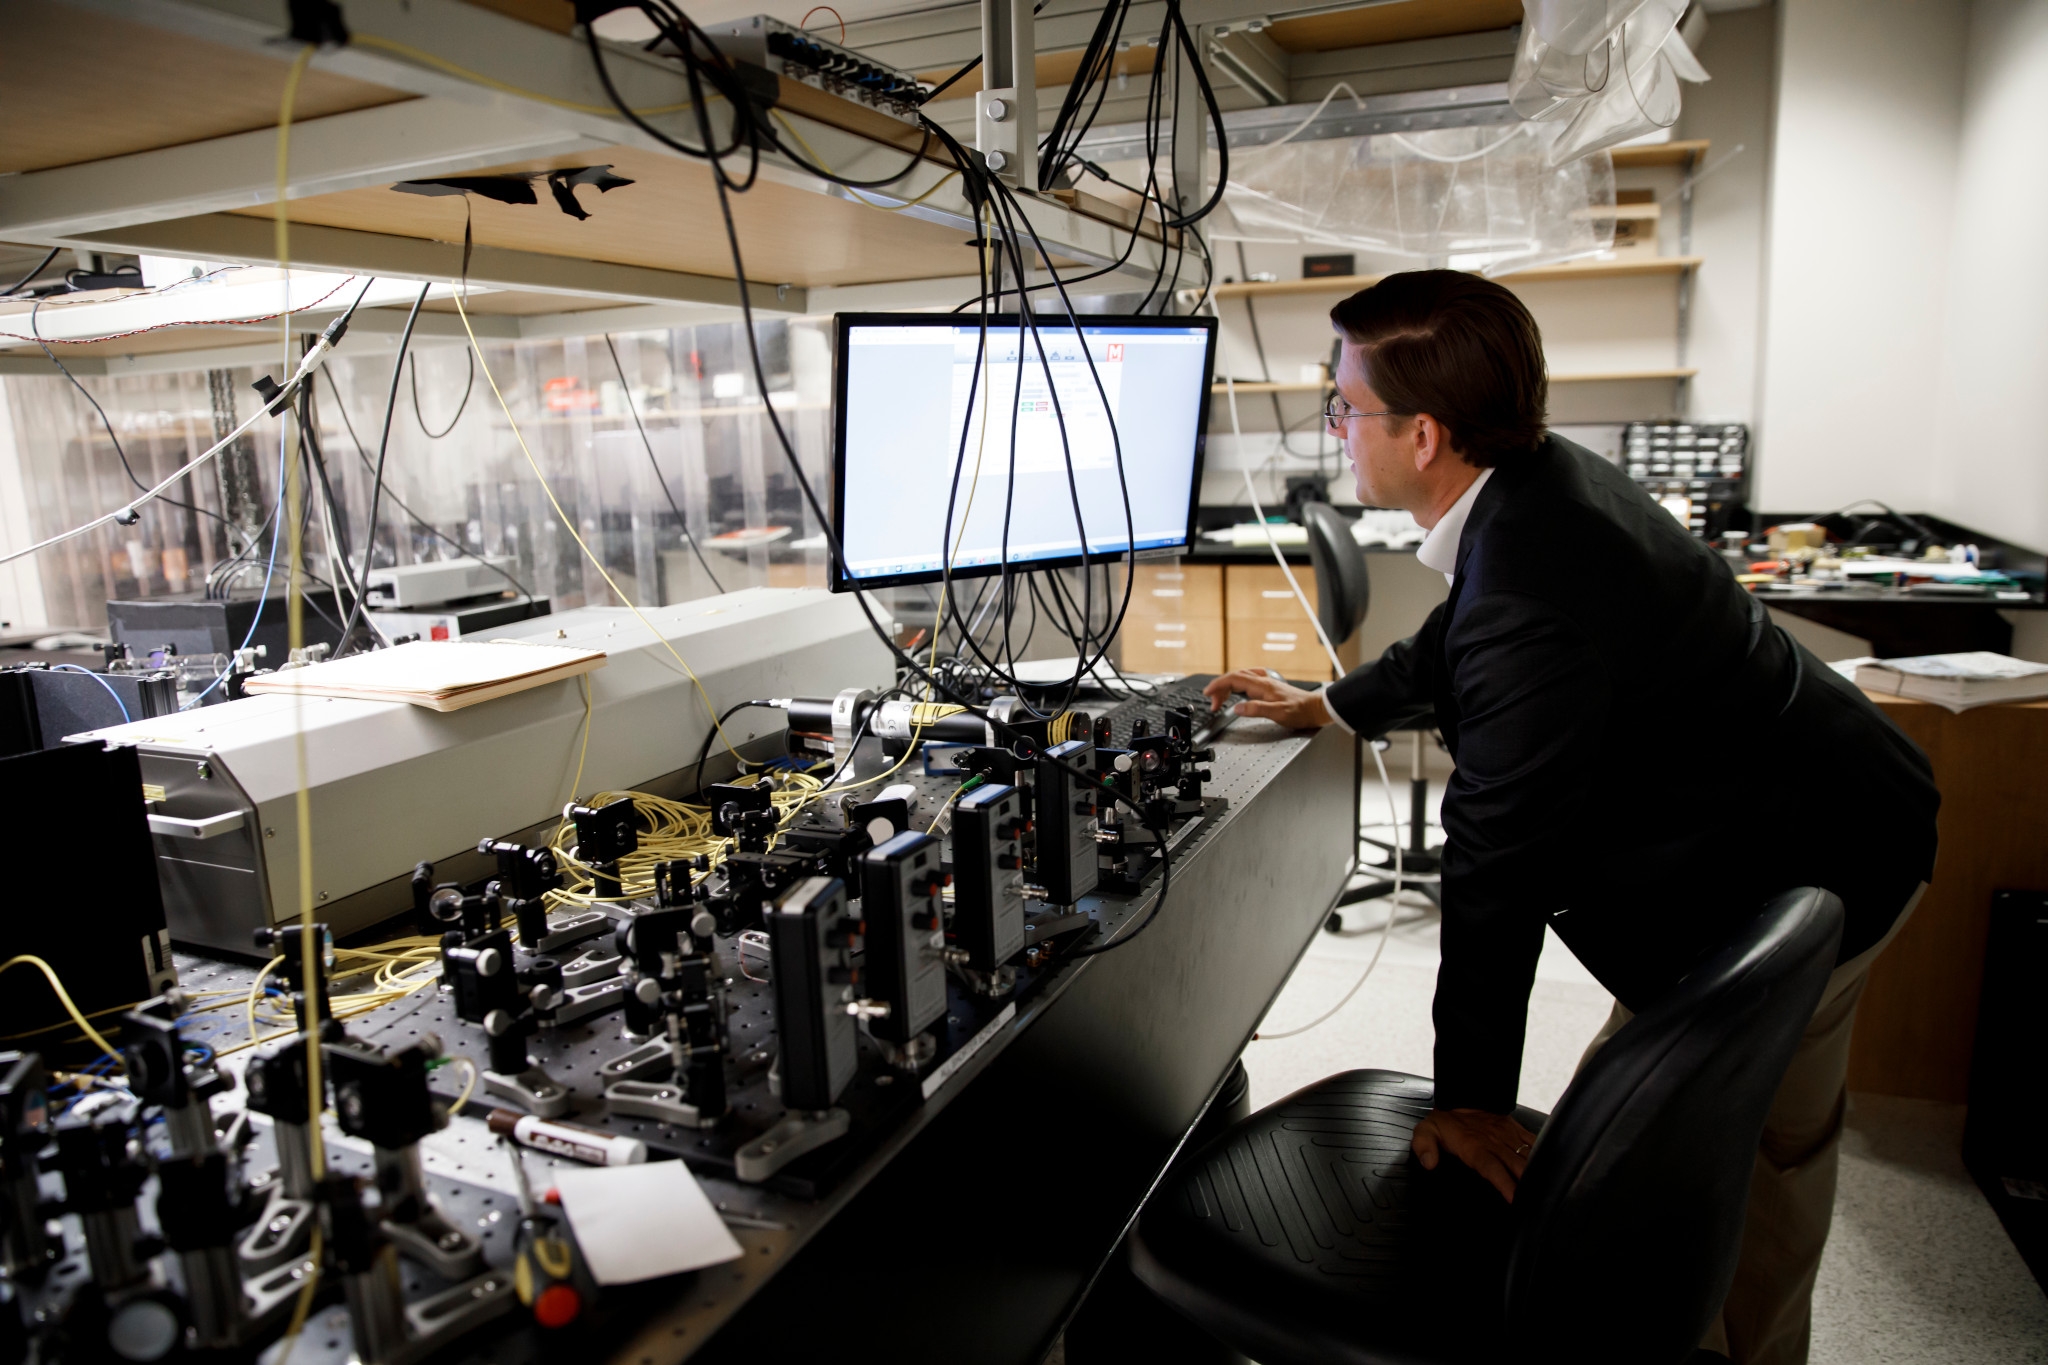 New center will develop technologies, materials made possible by ‘second quantum revolution’